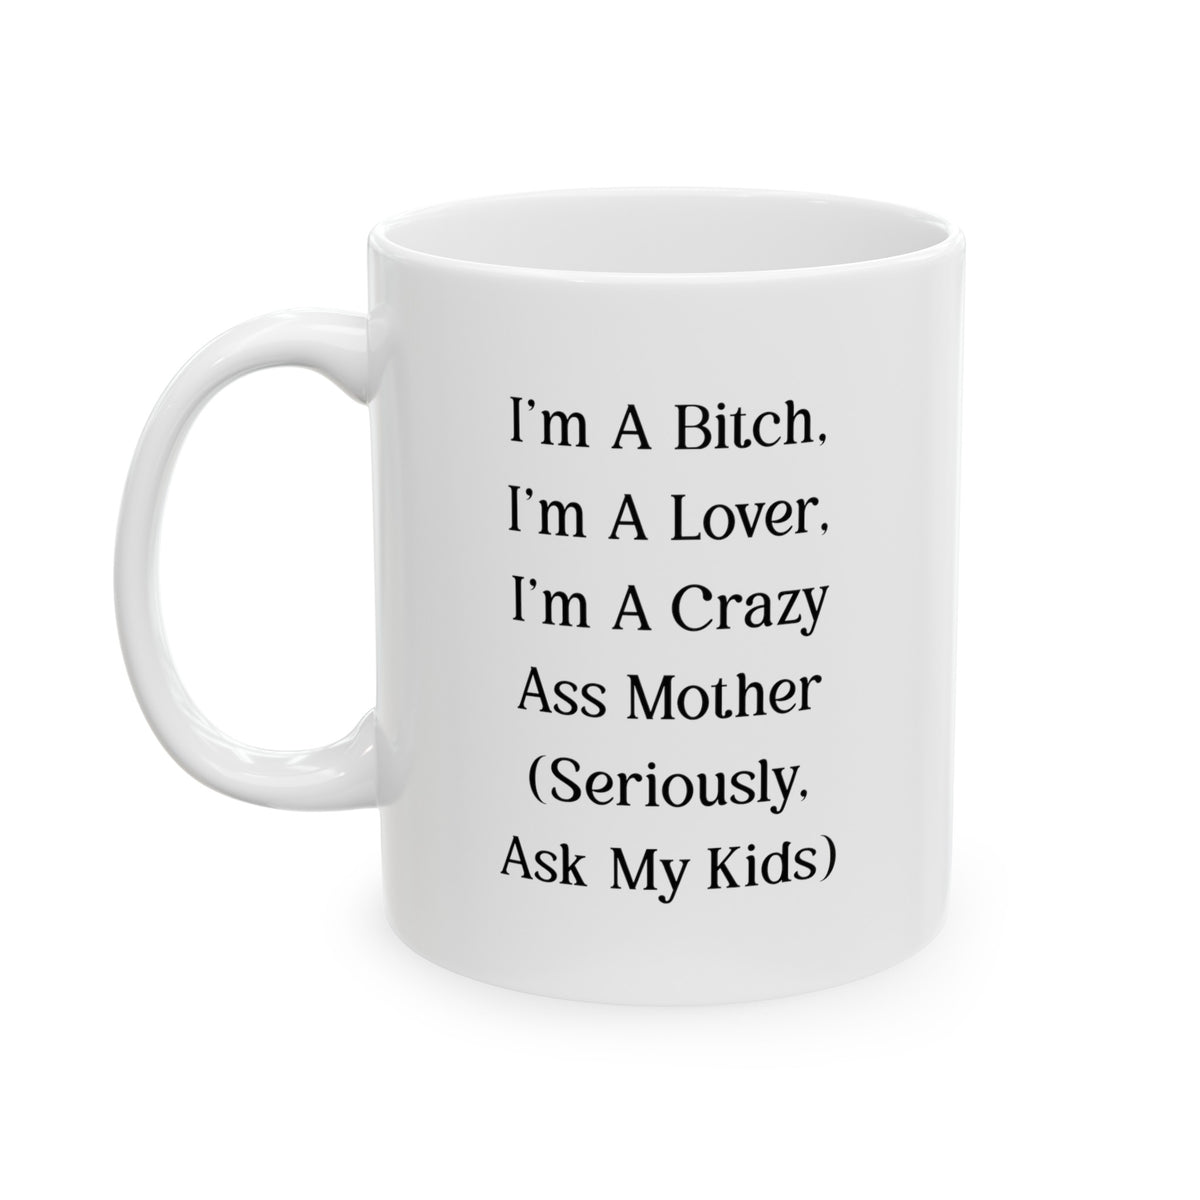 Mom Coffee Mug, I'm A Bitch, I'm A Lover, I'm A Crazy Ass Mother (Seriously, Ask My Kids), Funny Mothers Day For Mommy From Son Daughter